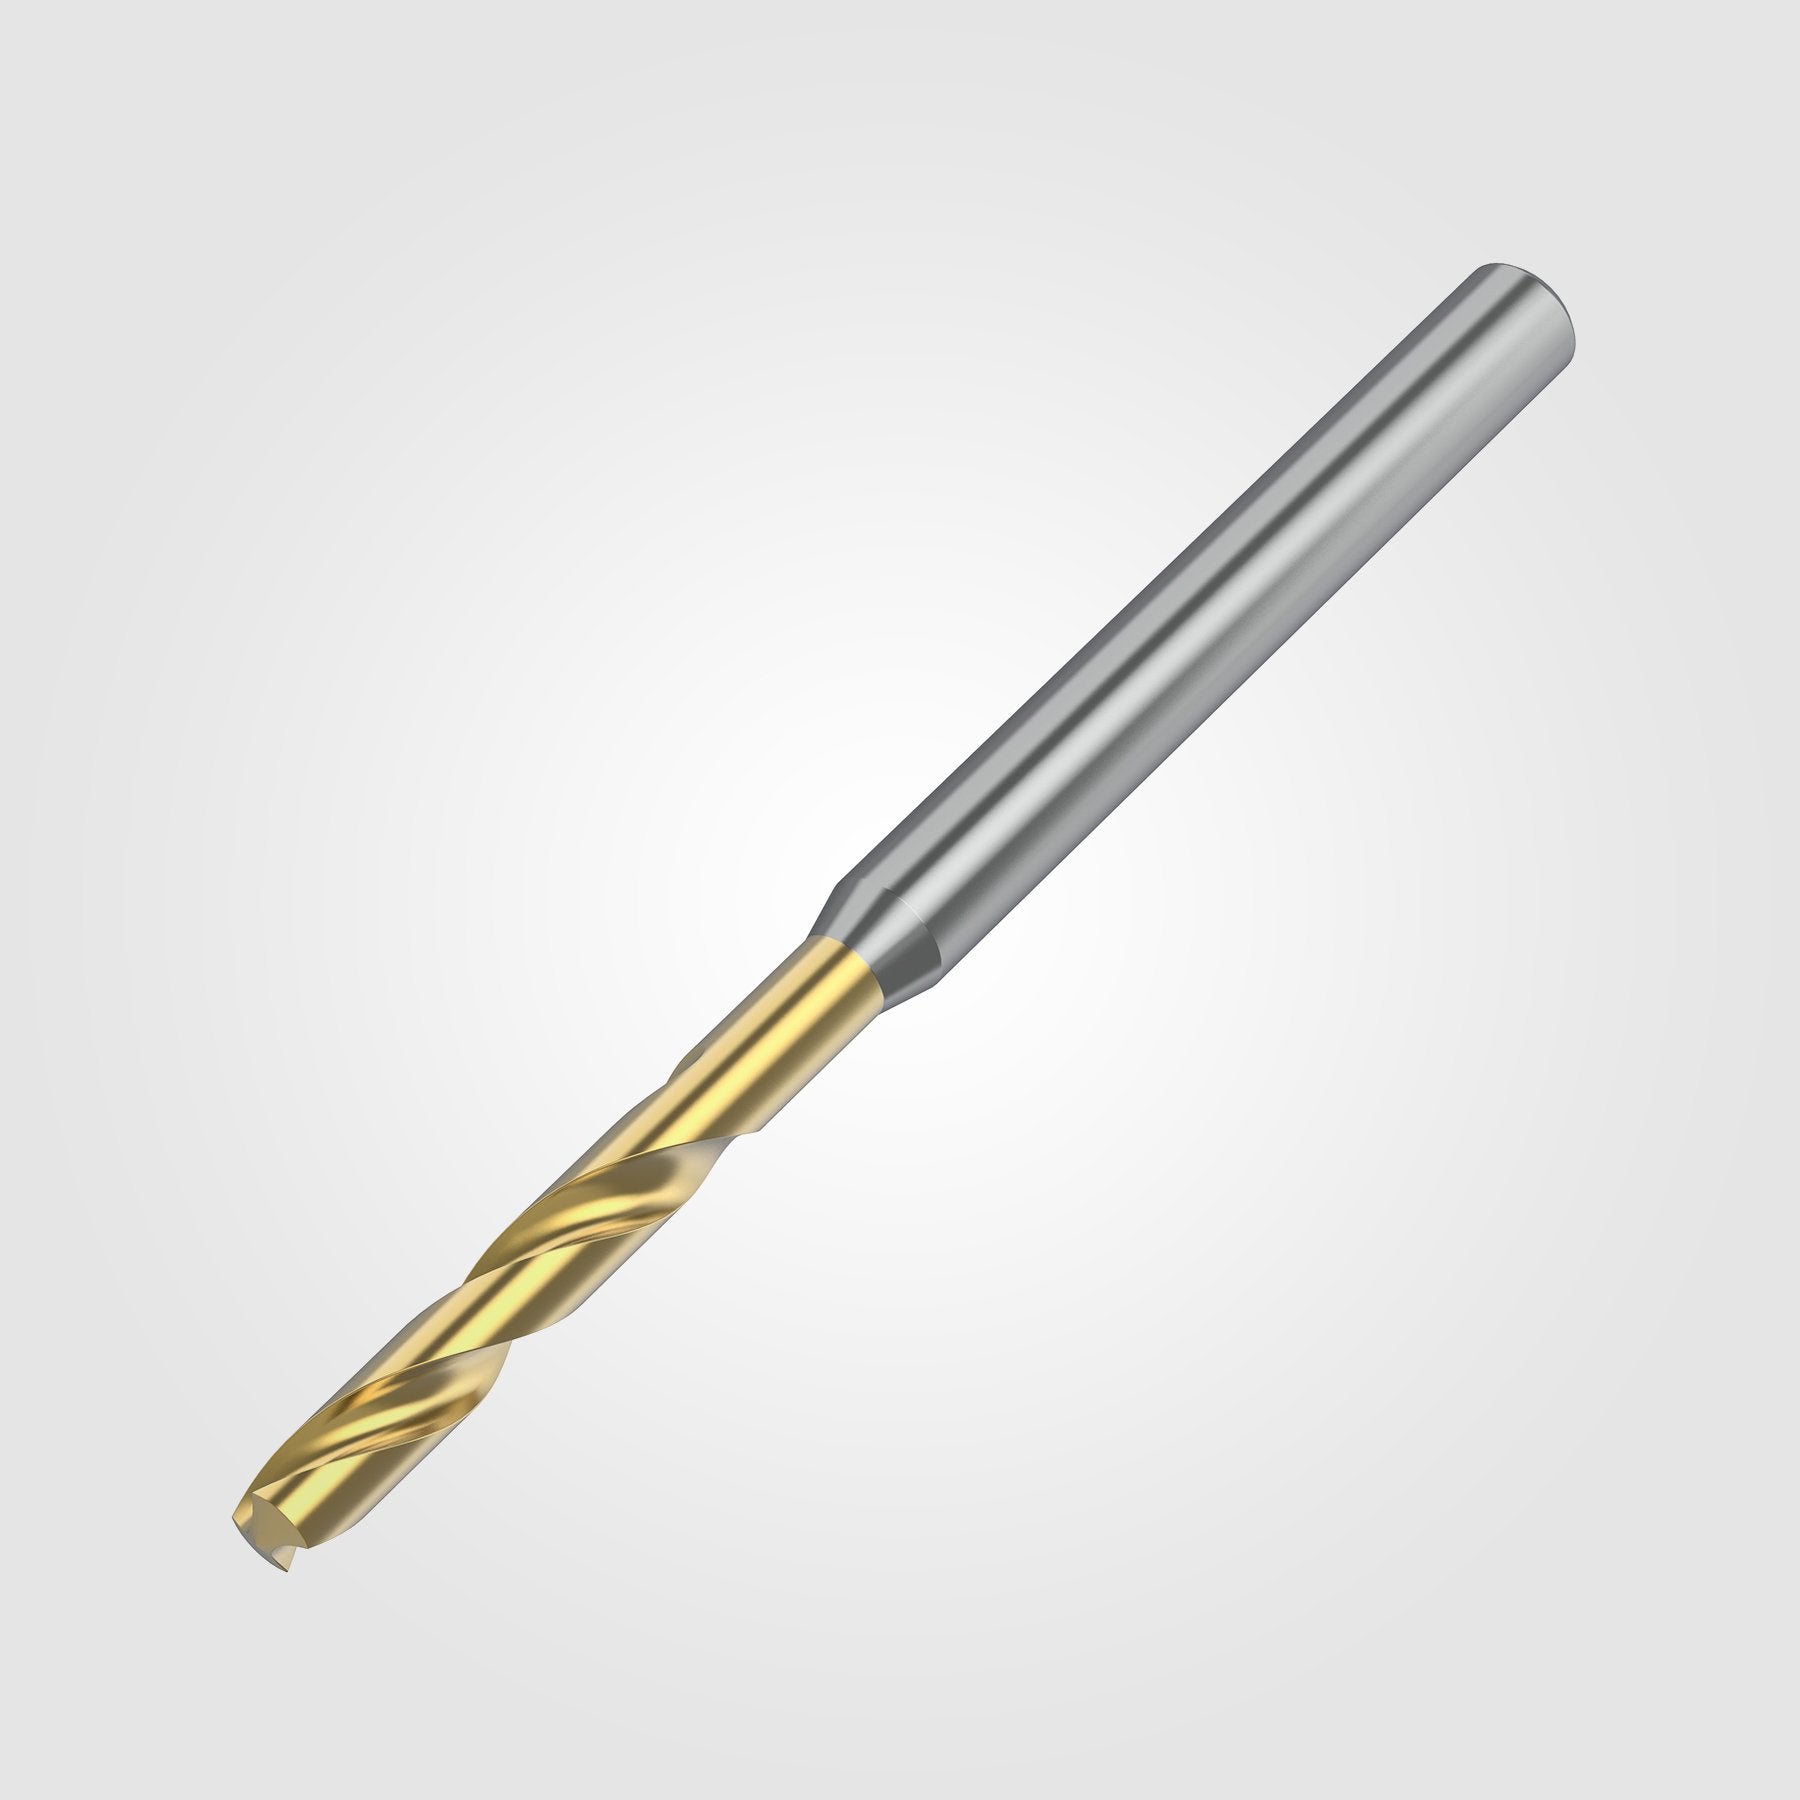 GOdrill (THROUGH COOLANT) | 16.7mm / .6575" / 3xD | SOLID CARBIDE DRILL | 4151285